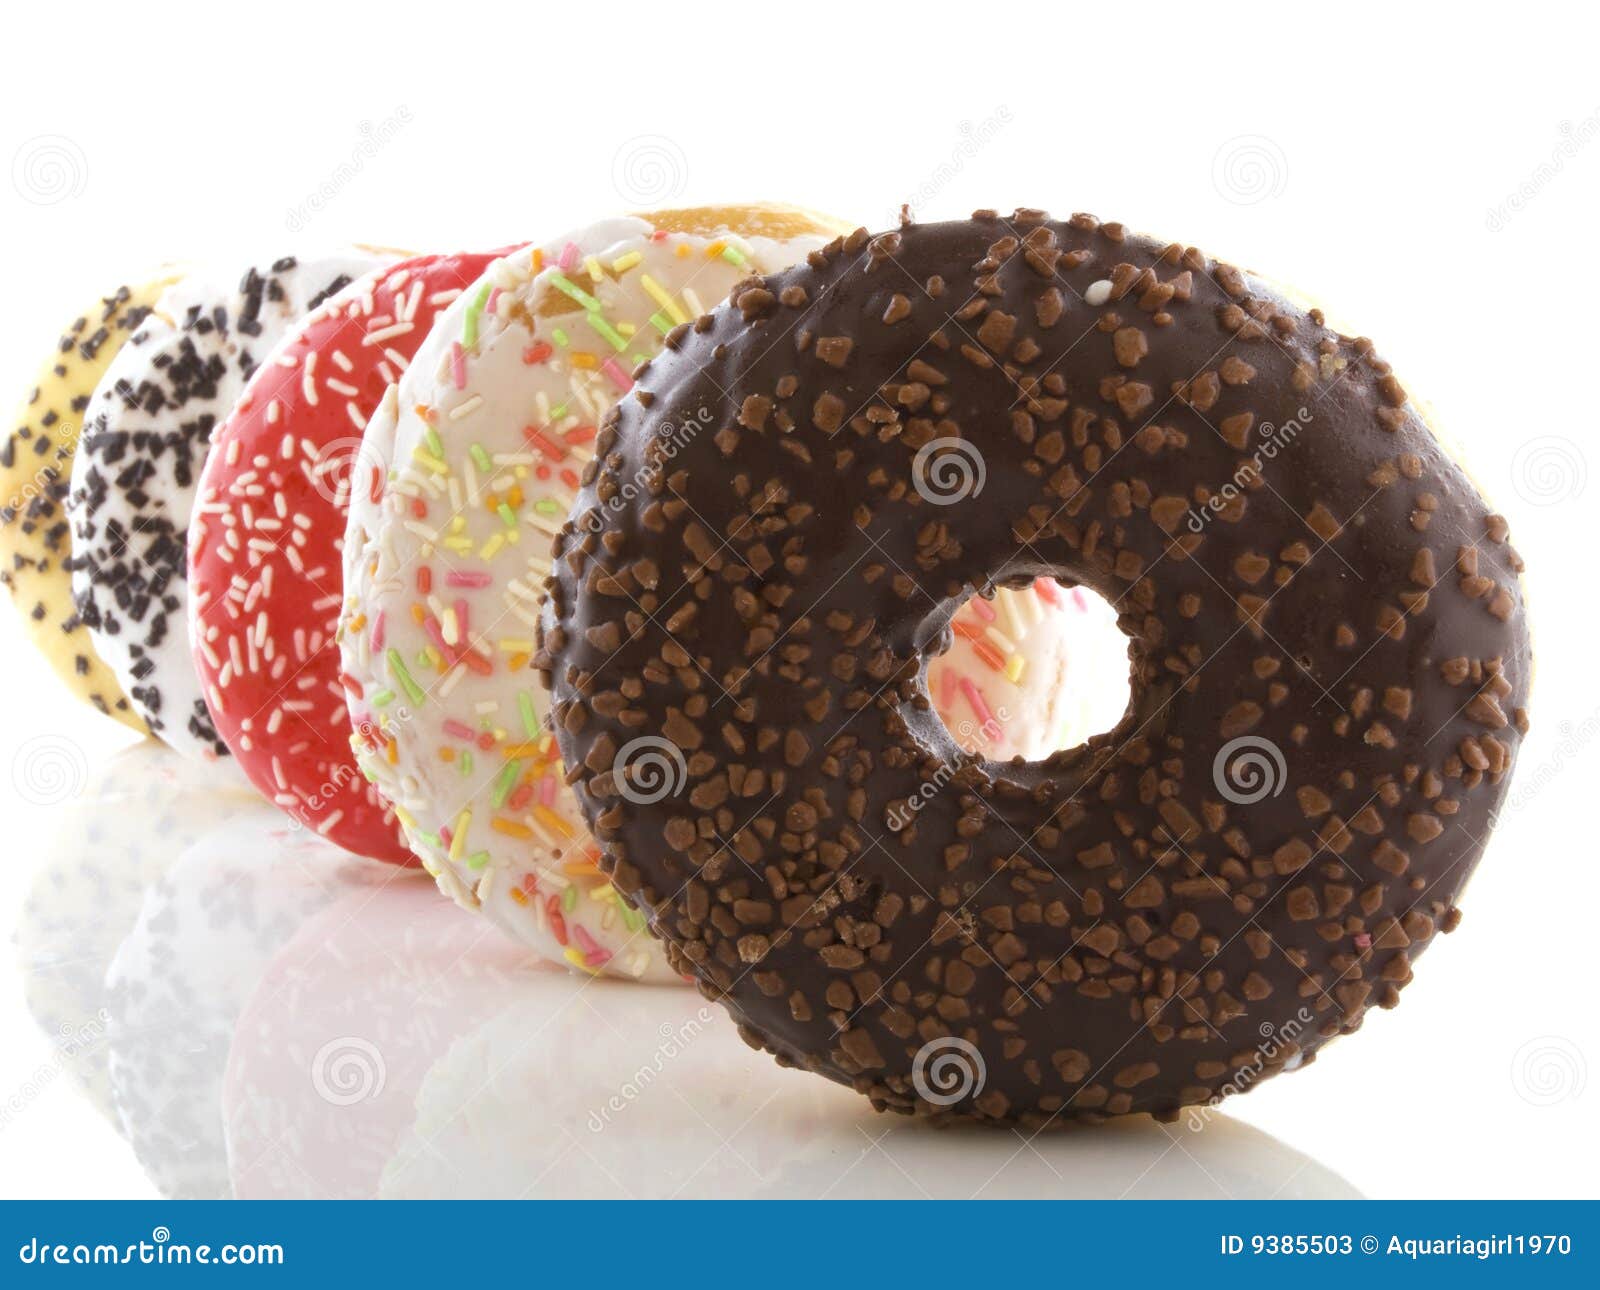 the donuts